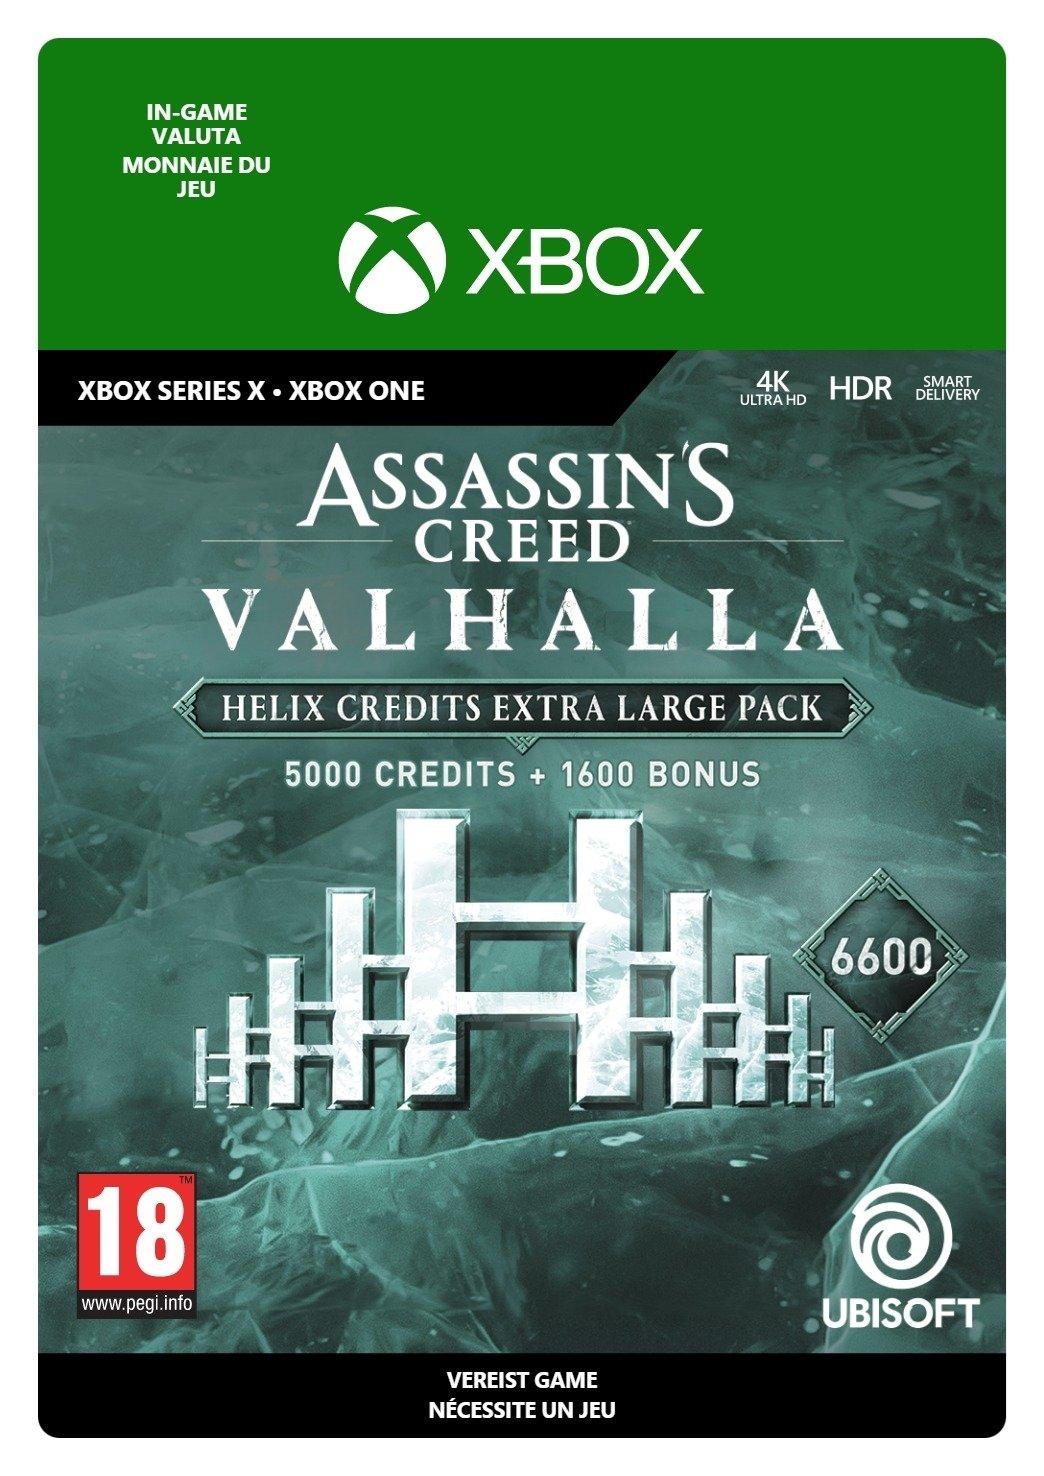 Assassin's Creed Valhalla Extra Large Helix Credits Pack - Xbox Series X/Xbox One - Currency | 7F6-00271 (5b48ca24-7686-ee4d-b8a4-988c715f25e5)